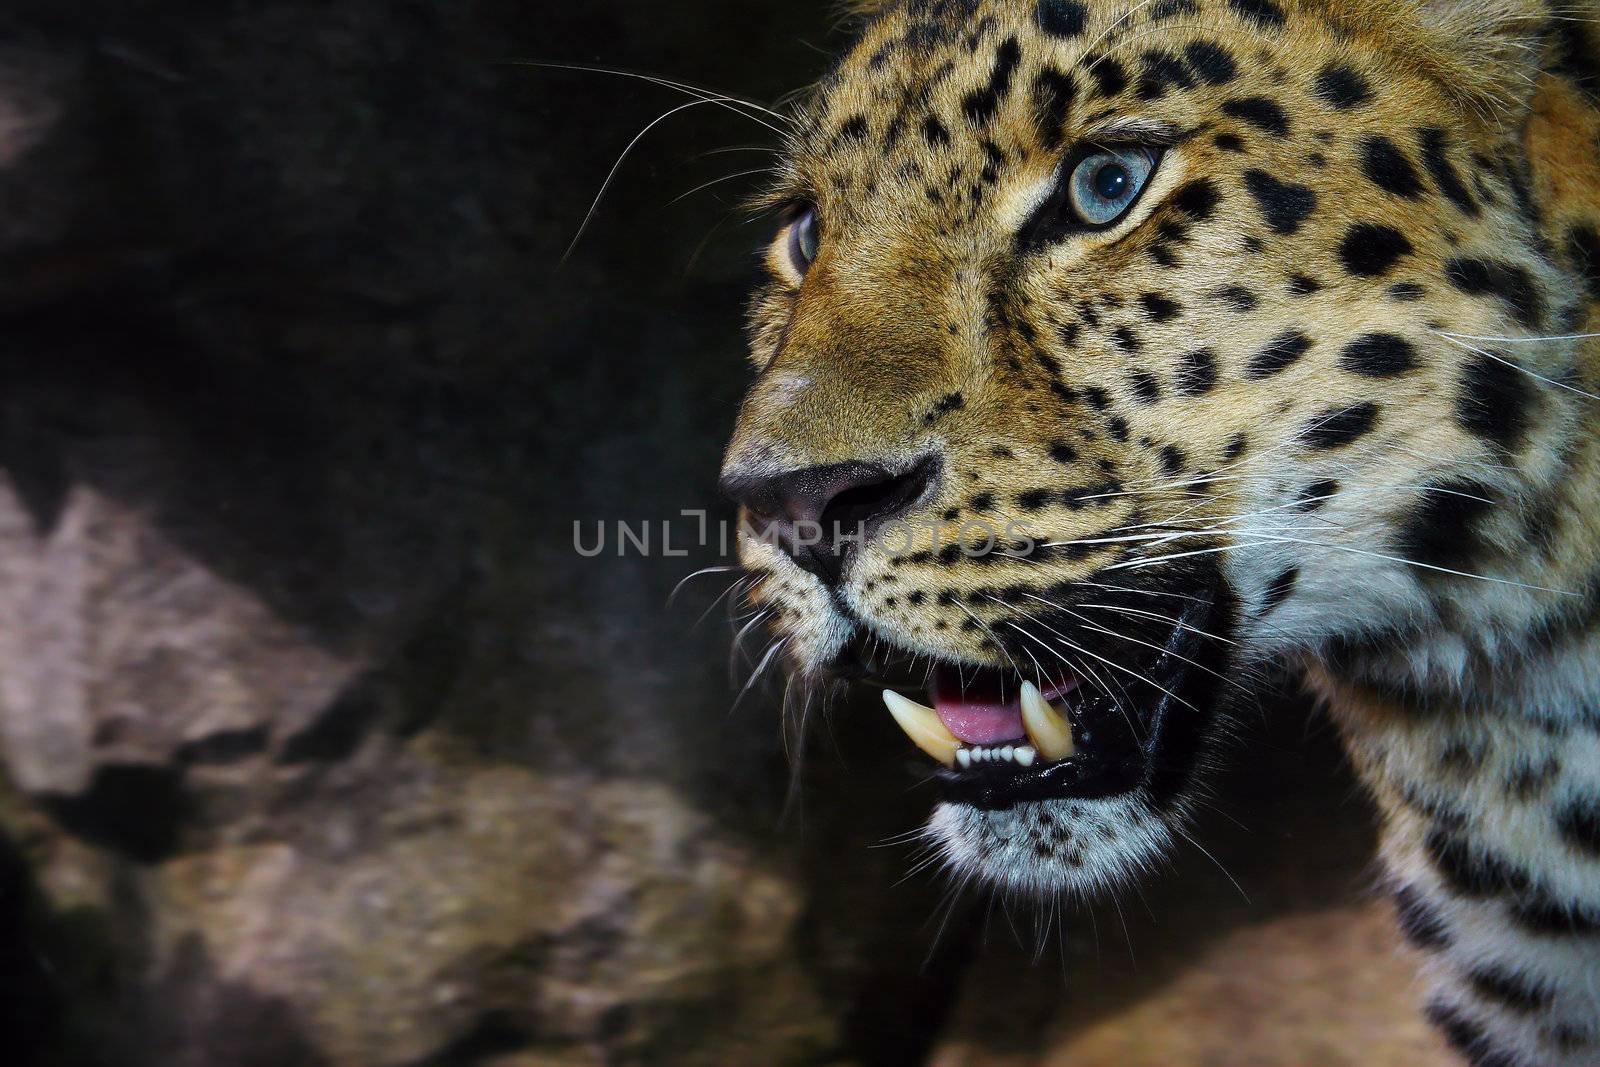 Amur Leopard on the prowl by Coffee999